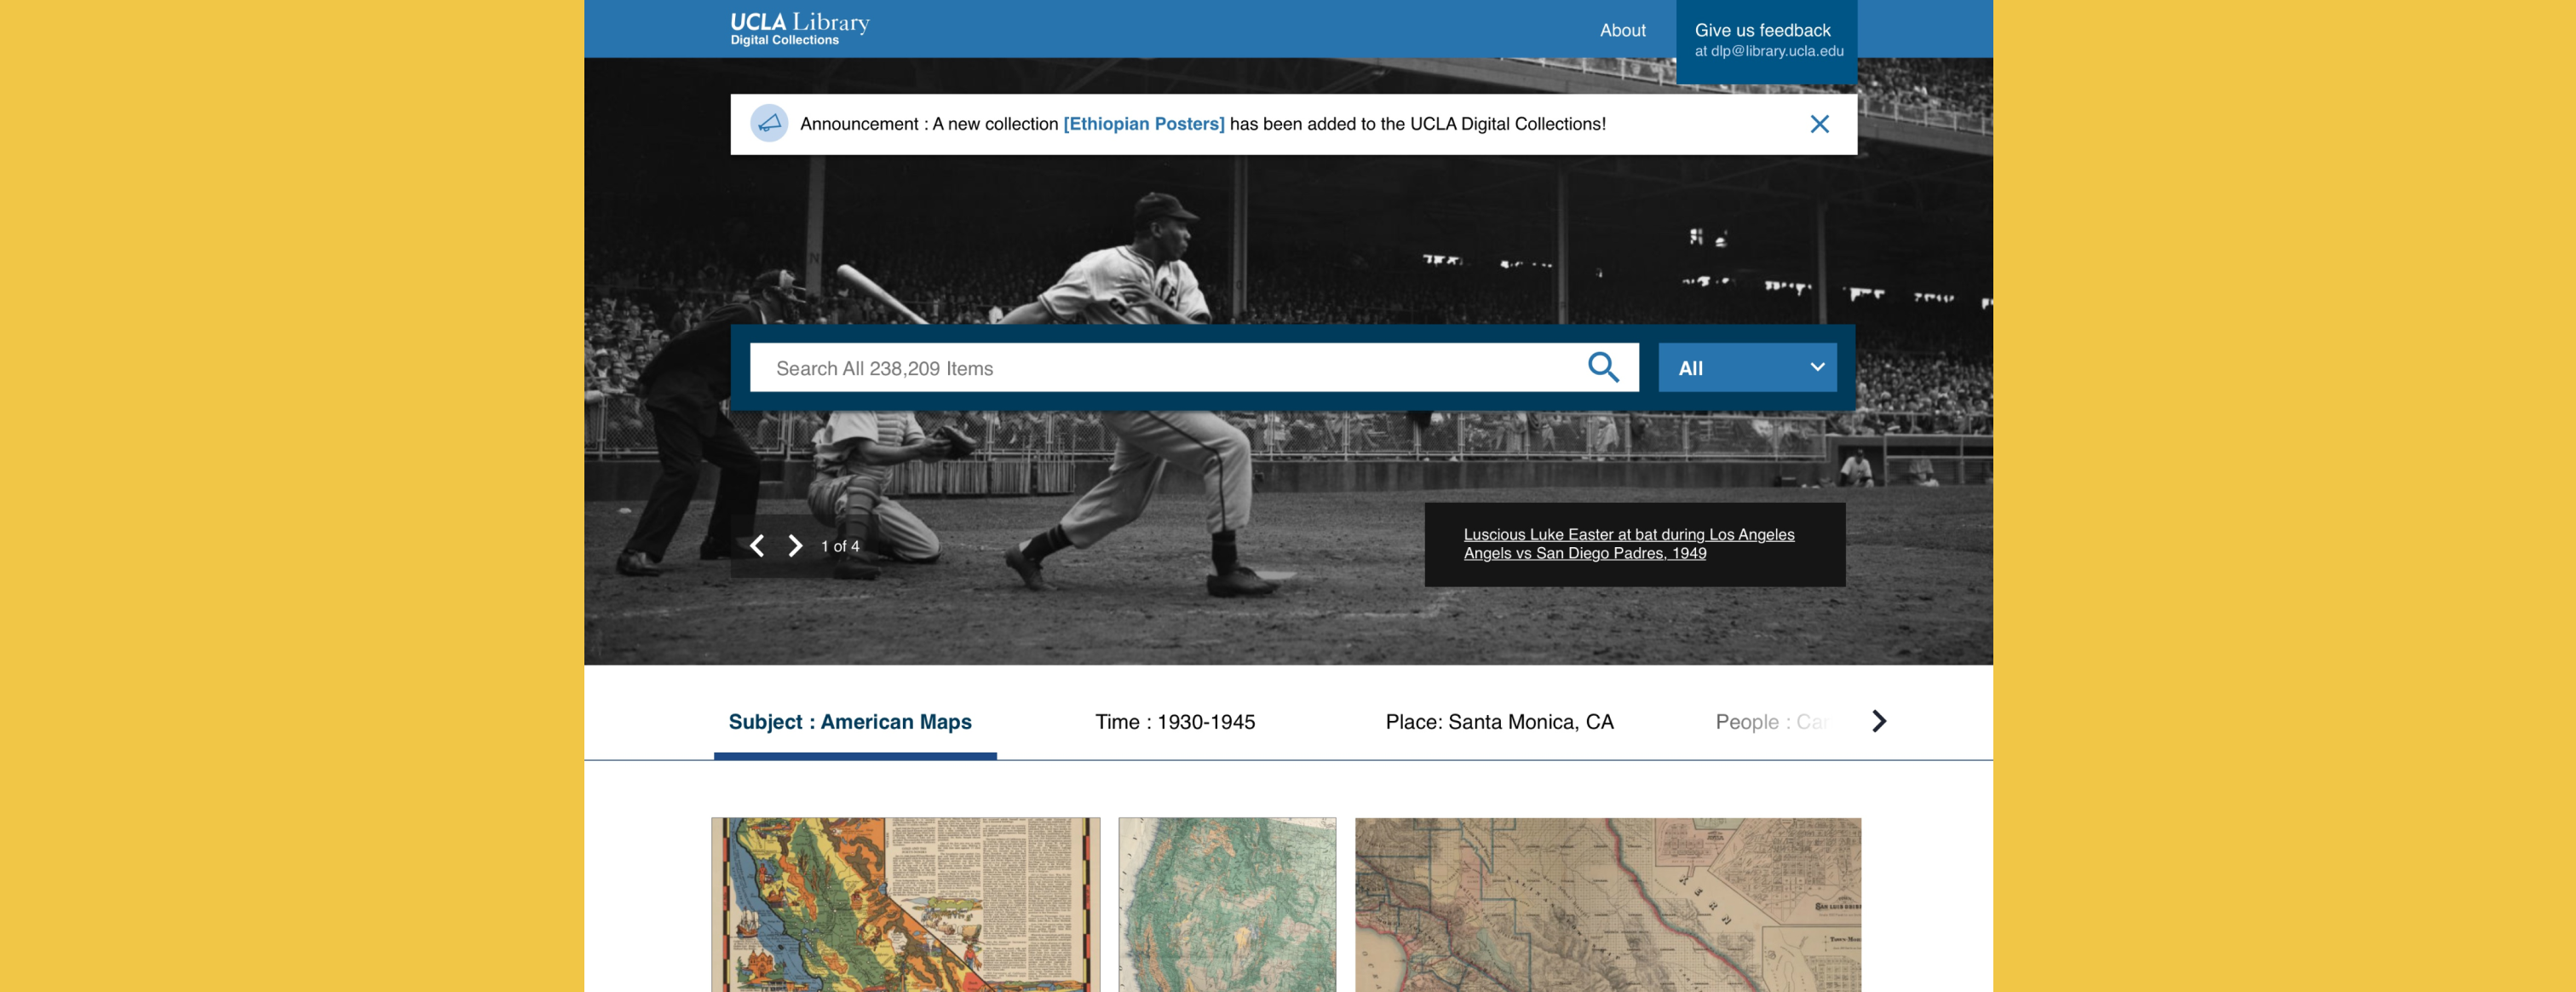 Comp of UCLA Digital Library's homepage in its final iteration